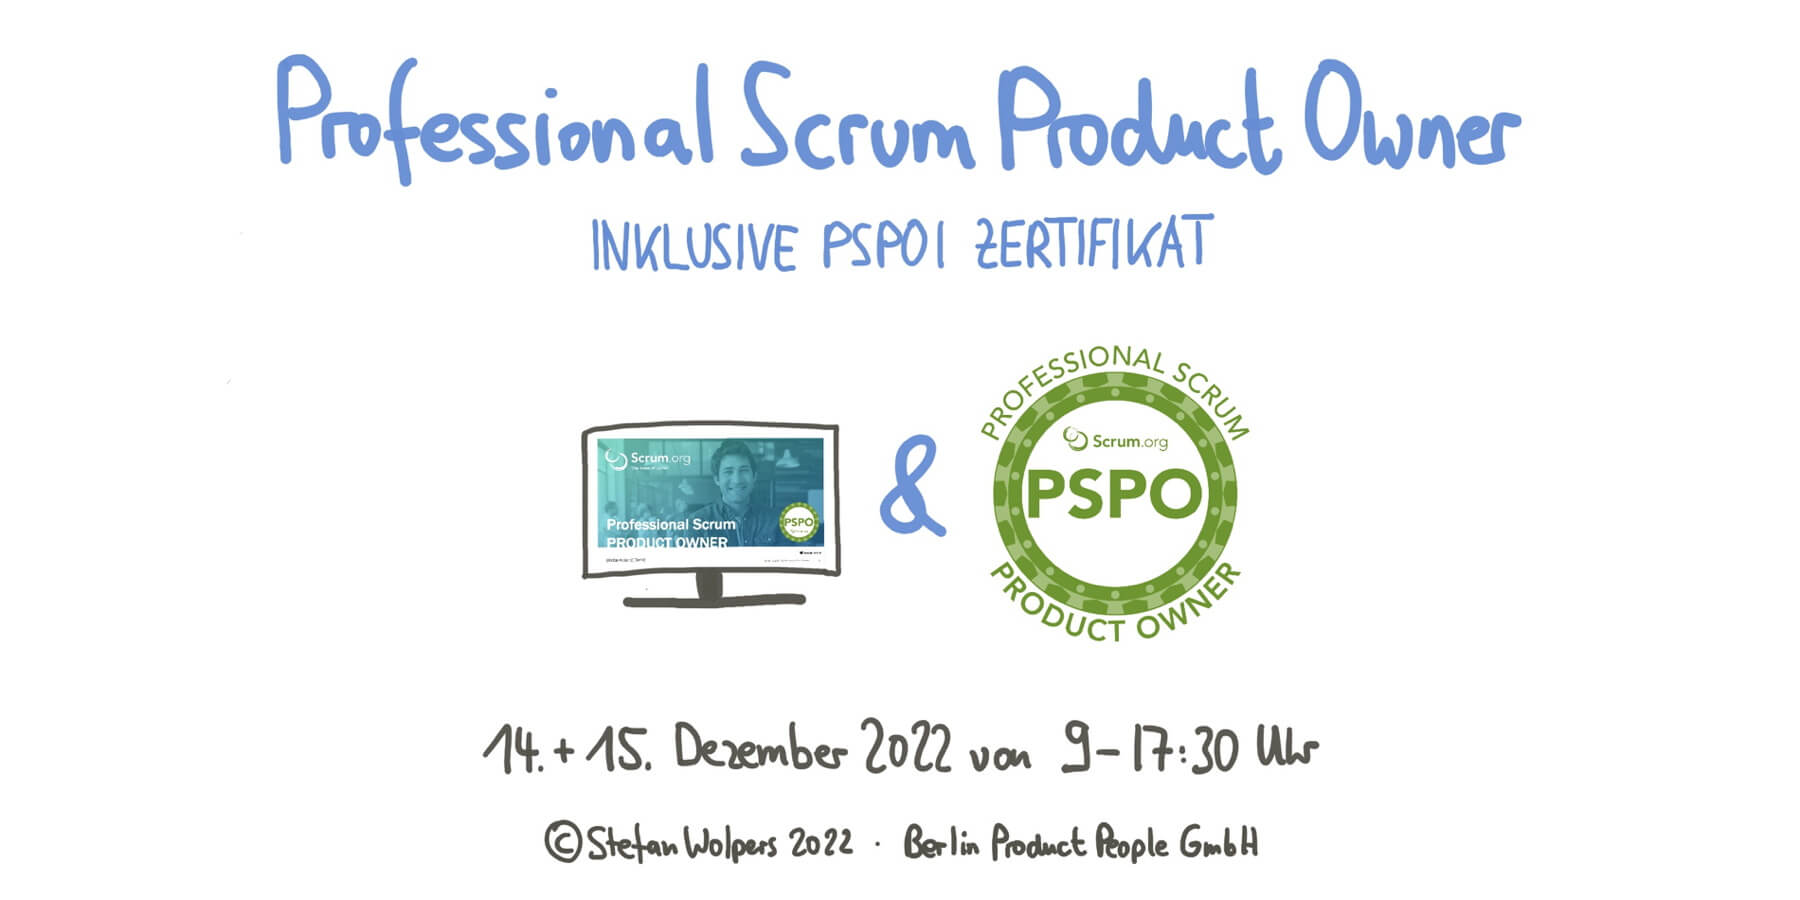 Professional Scrum Product Owner Onlineschulung mit PSPO I Zertifizierung — 14. und 15. Dezember 2022 — Berlin Product People GmbH